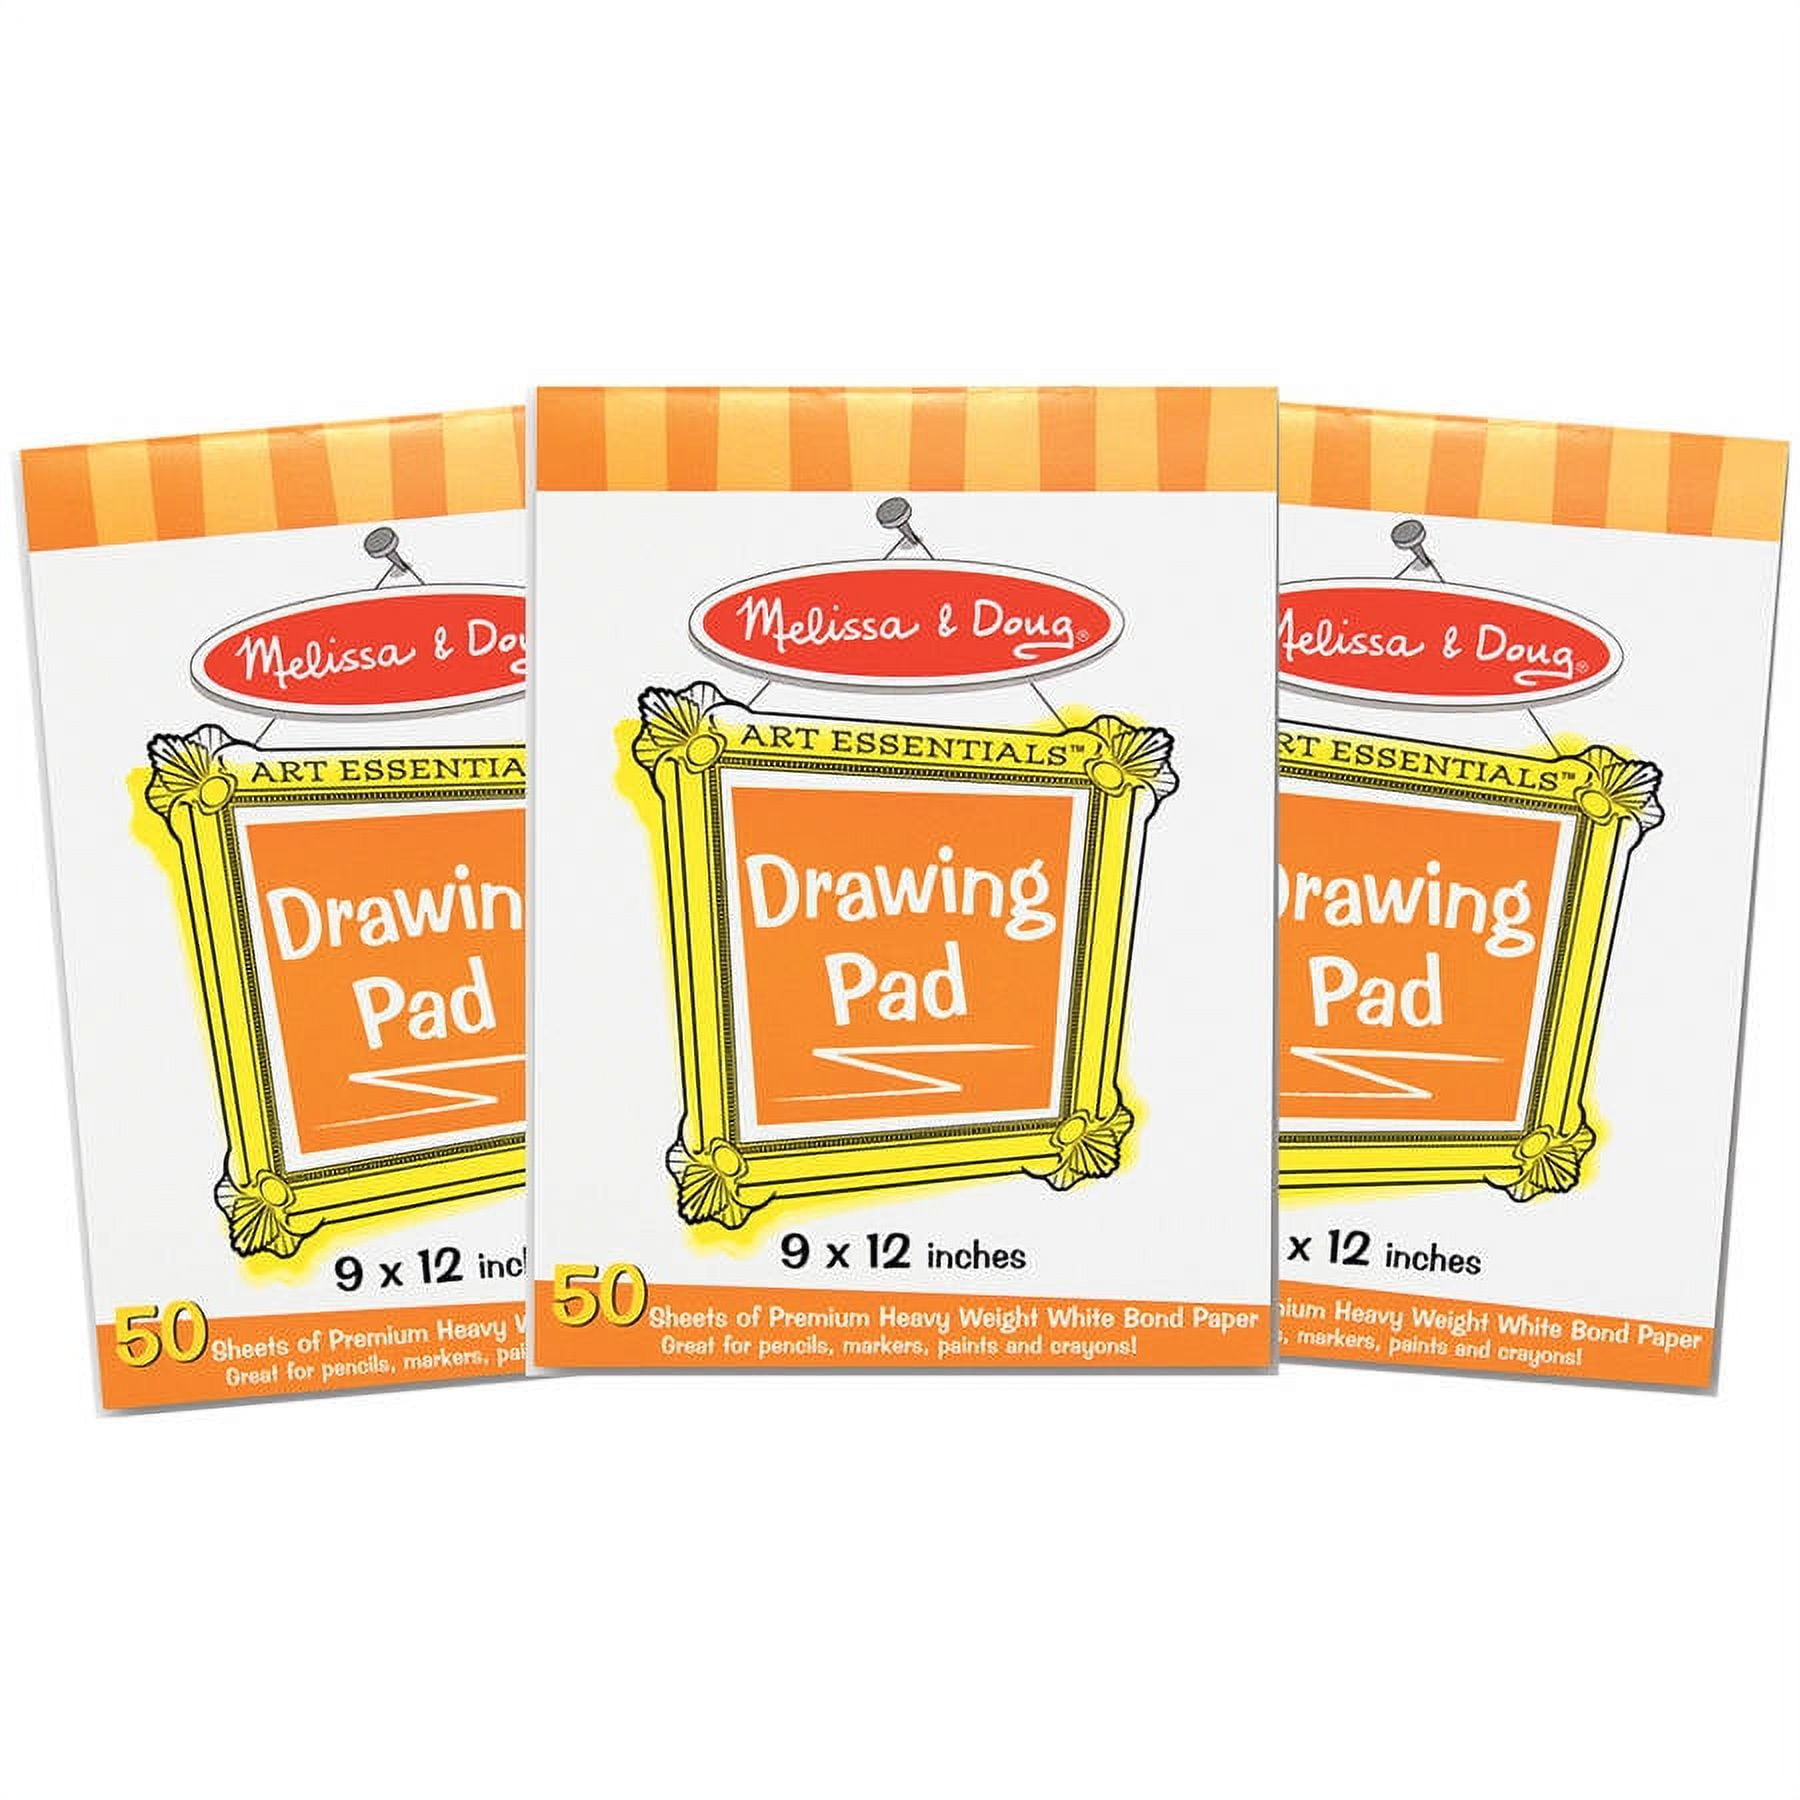 Melissa & Doug Drawing Paper Pad 6 x 9 Inches - 50 Sheets, 4-Pack